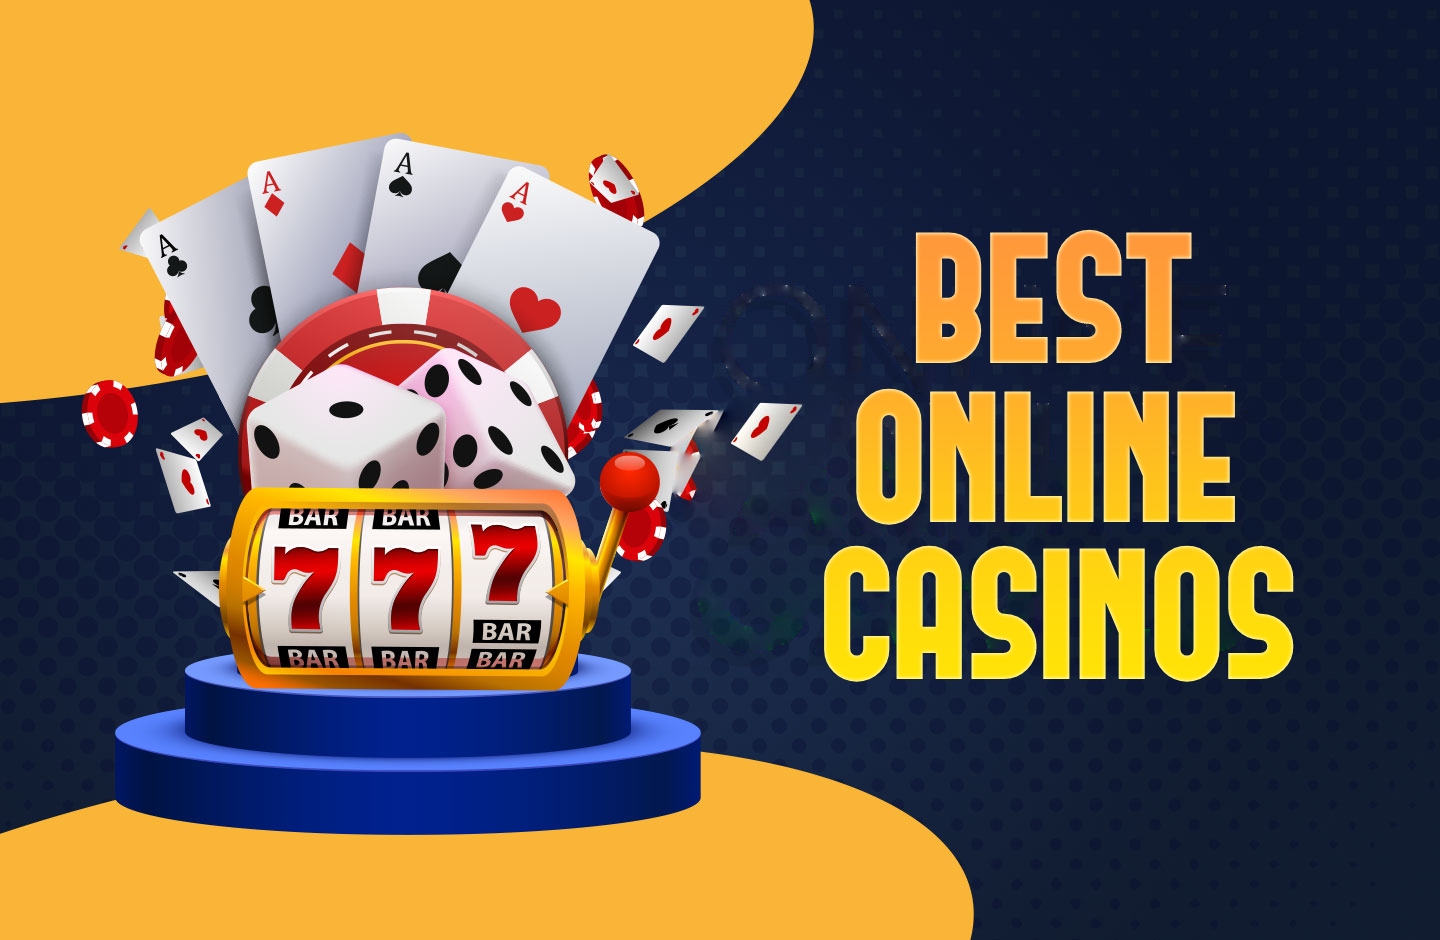 Best Online Casinos for Real Money (2023): Top 10 Sites Ranked by Bonuses, Games & Fairness